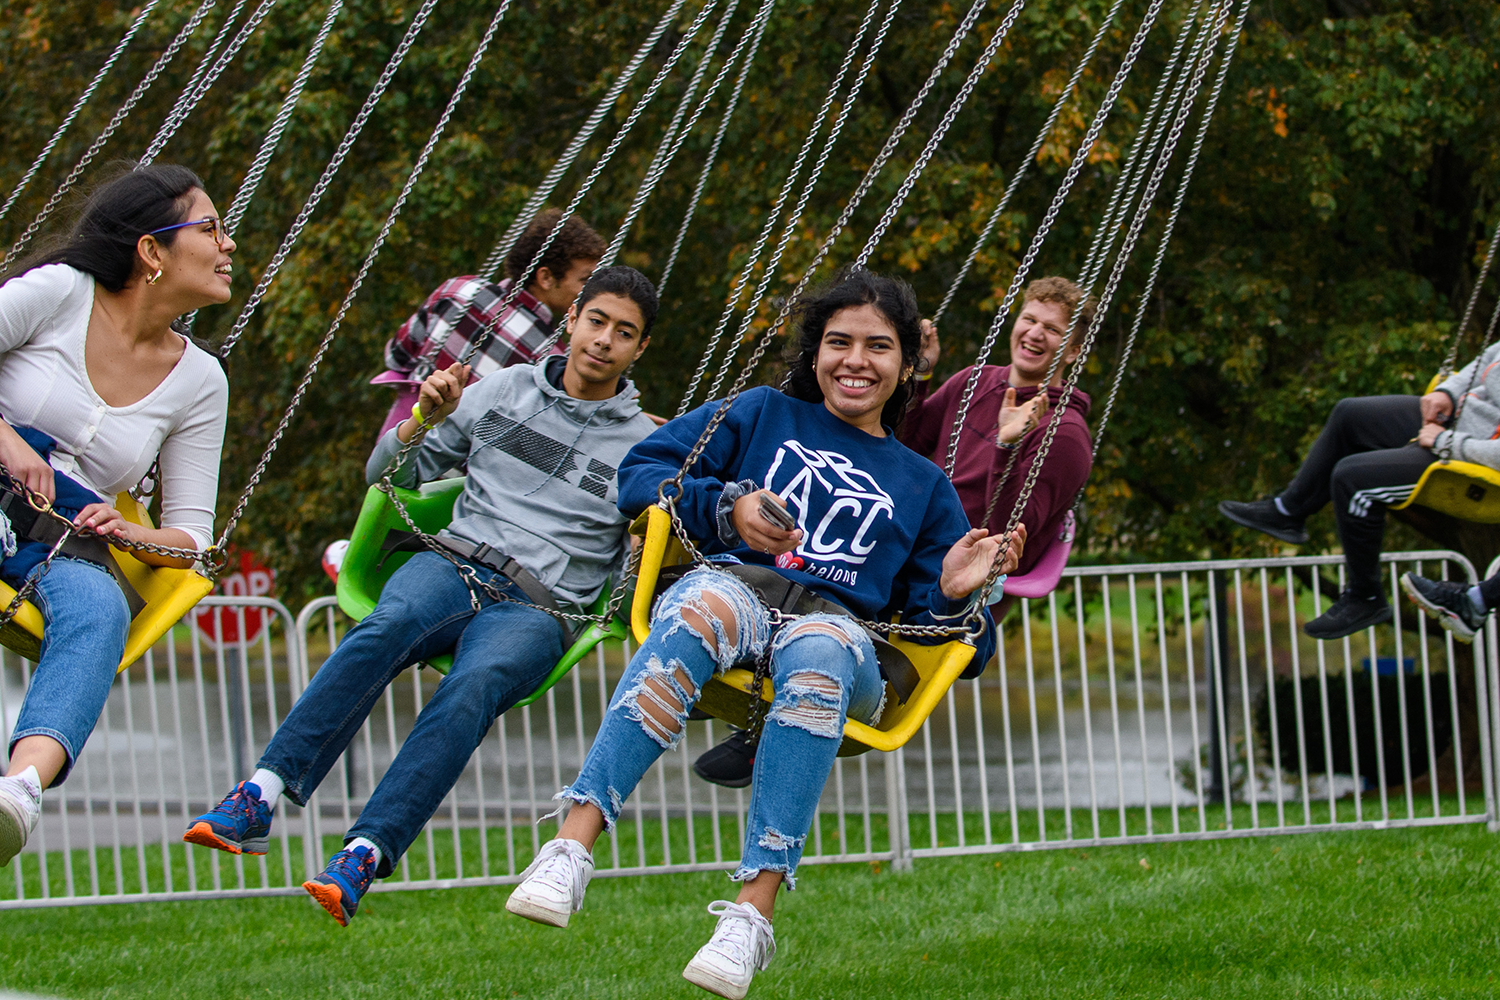 Students and families attend the Homecoming Carnival during Family Weekend